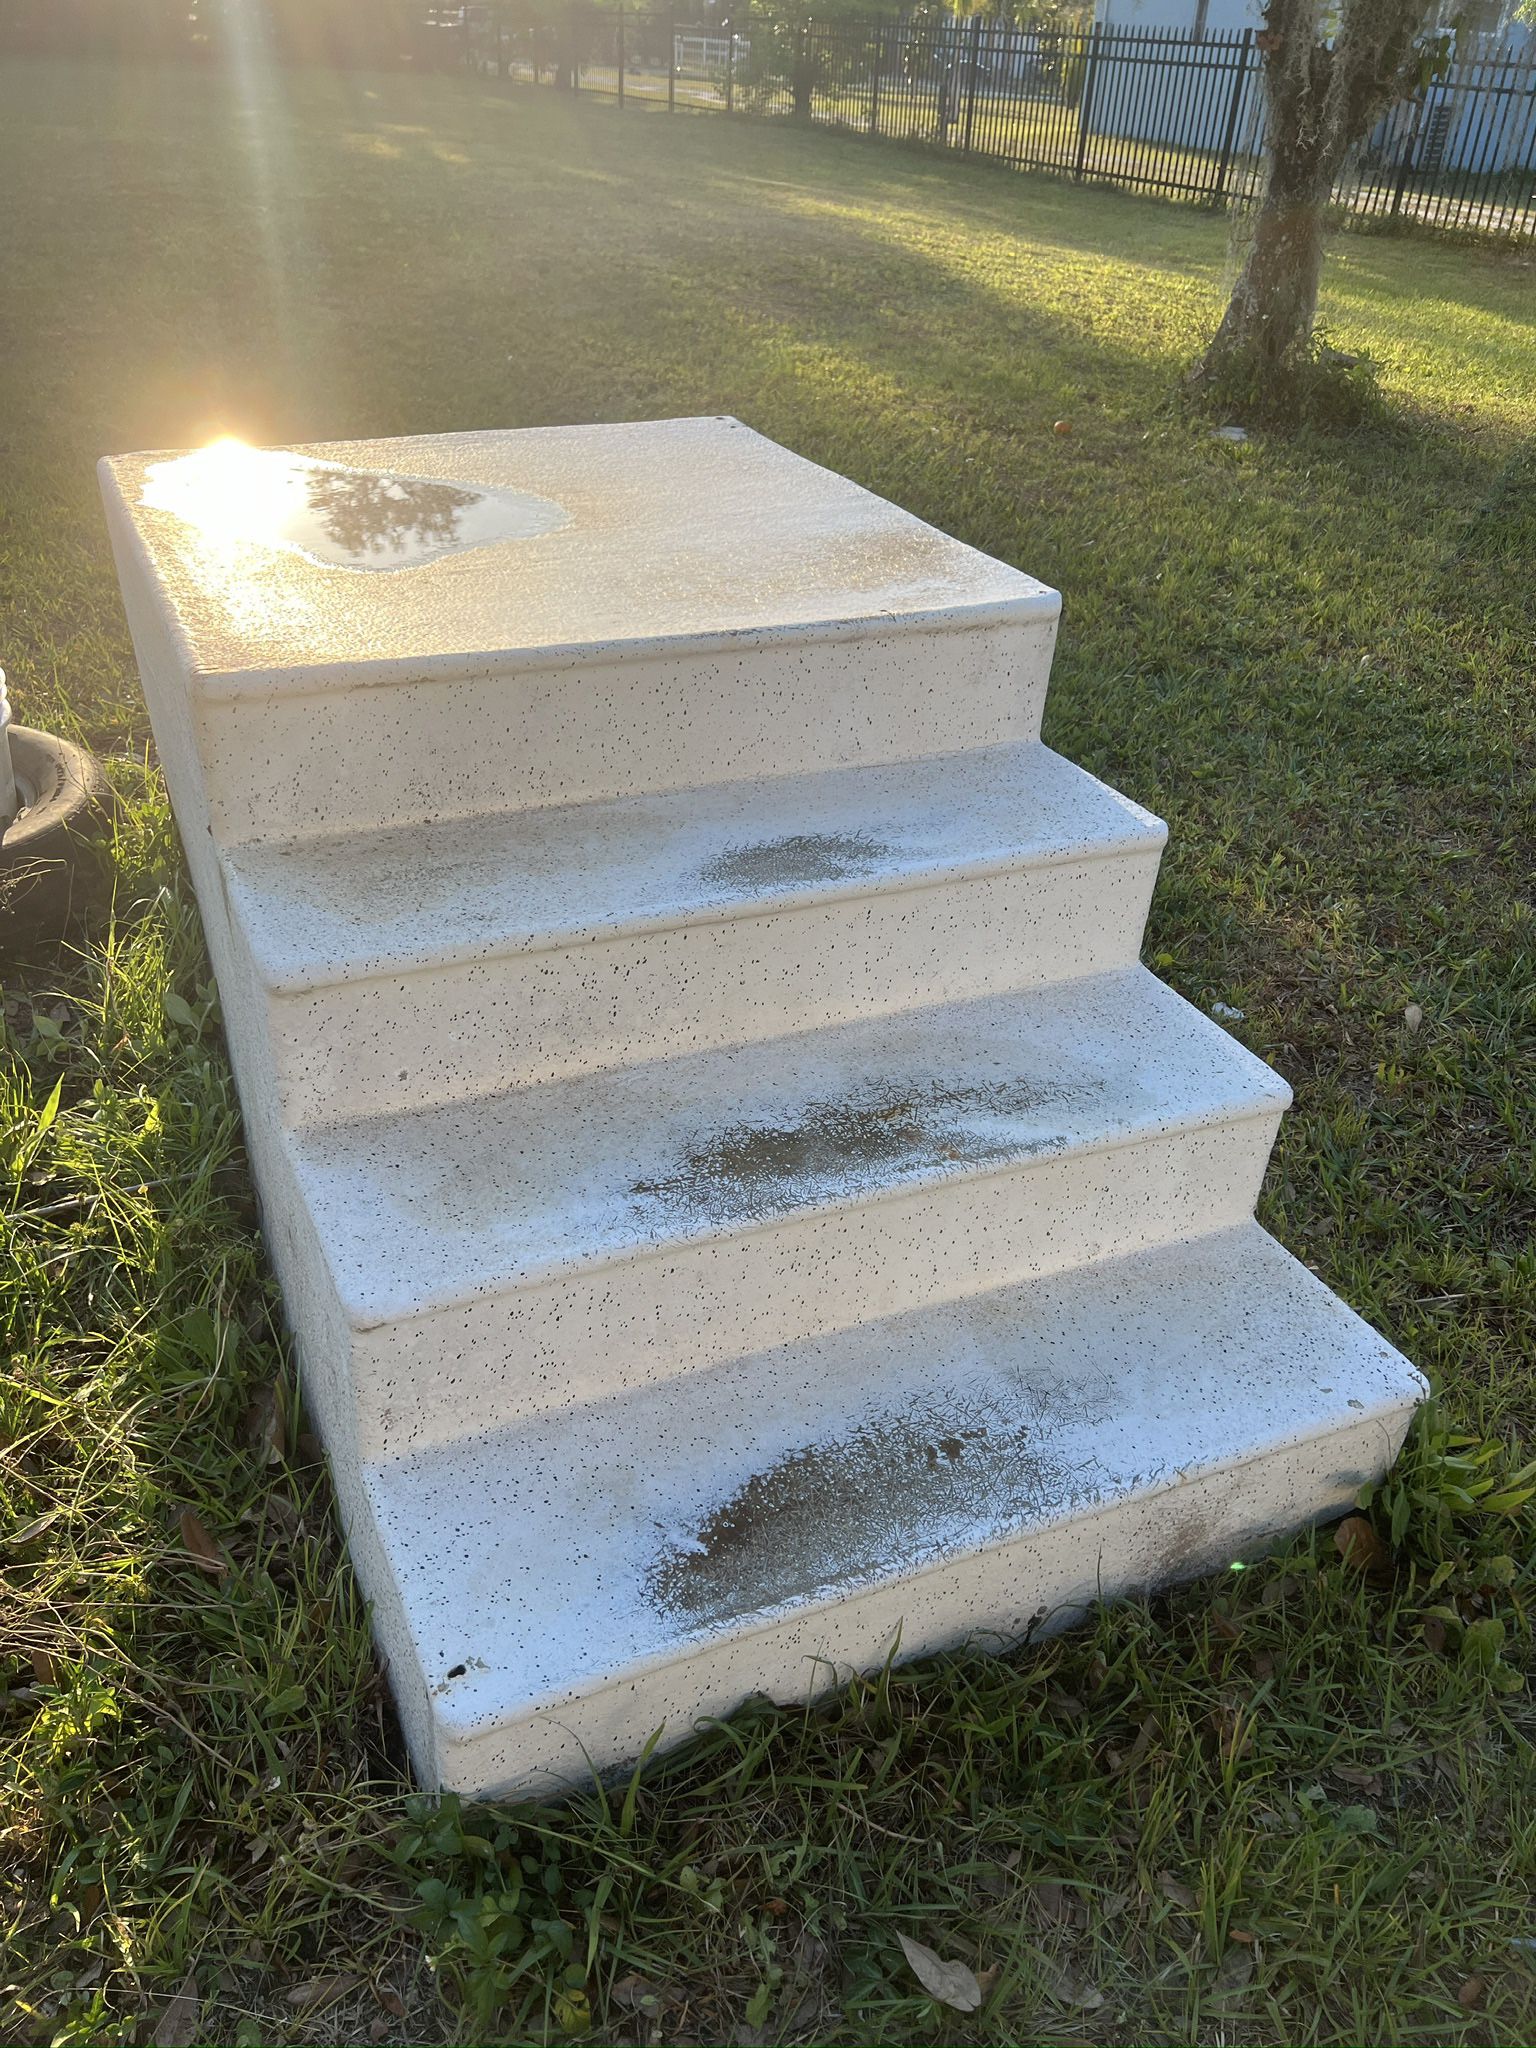 Fiberglass Stairs For Mobile Home